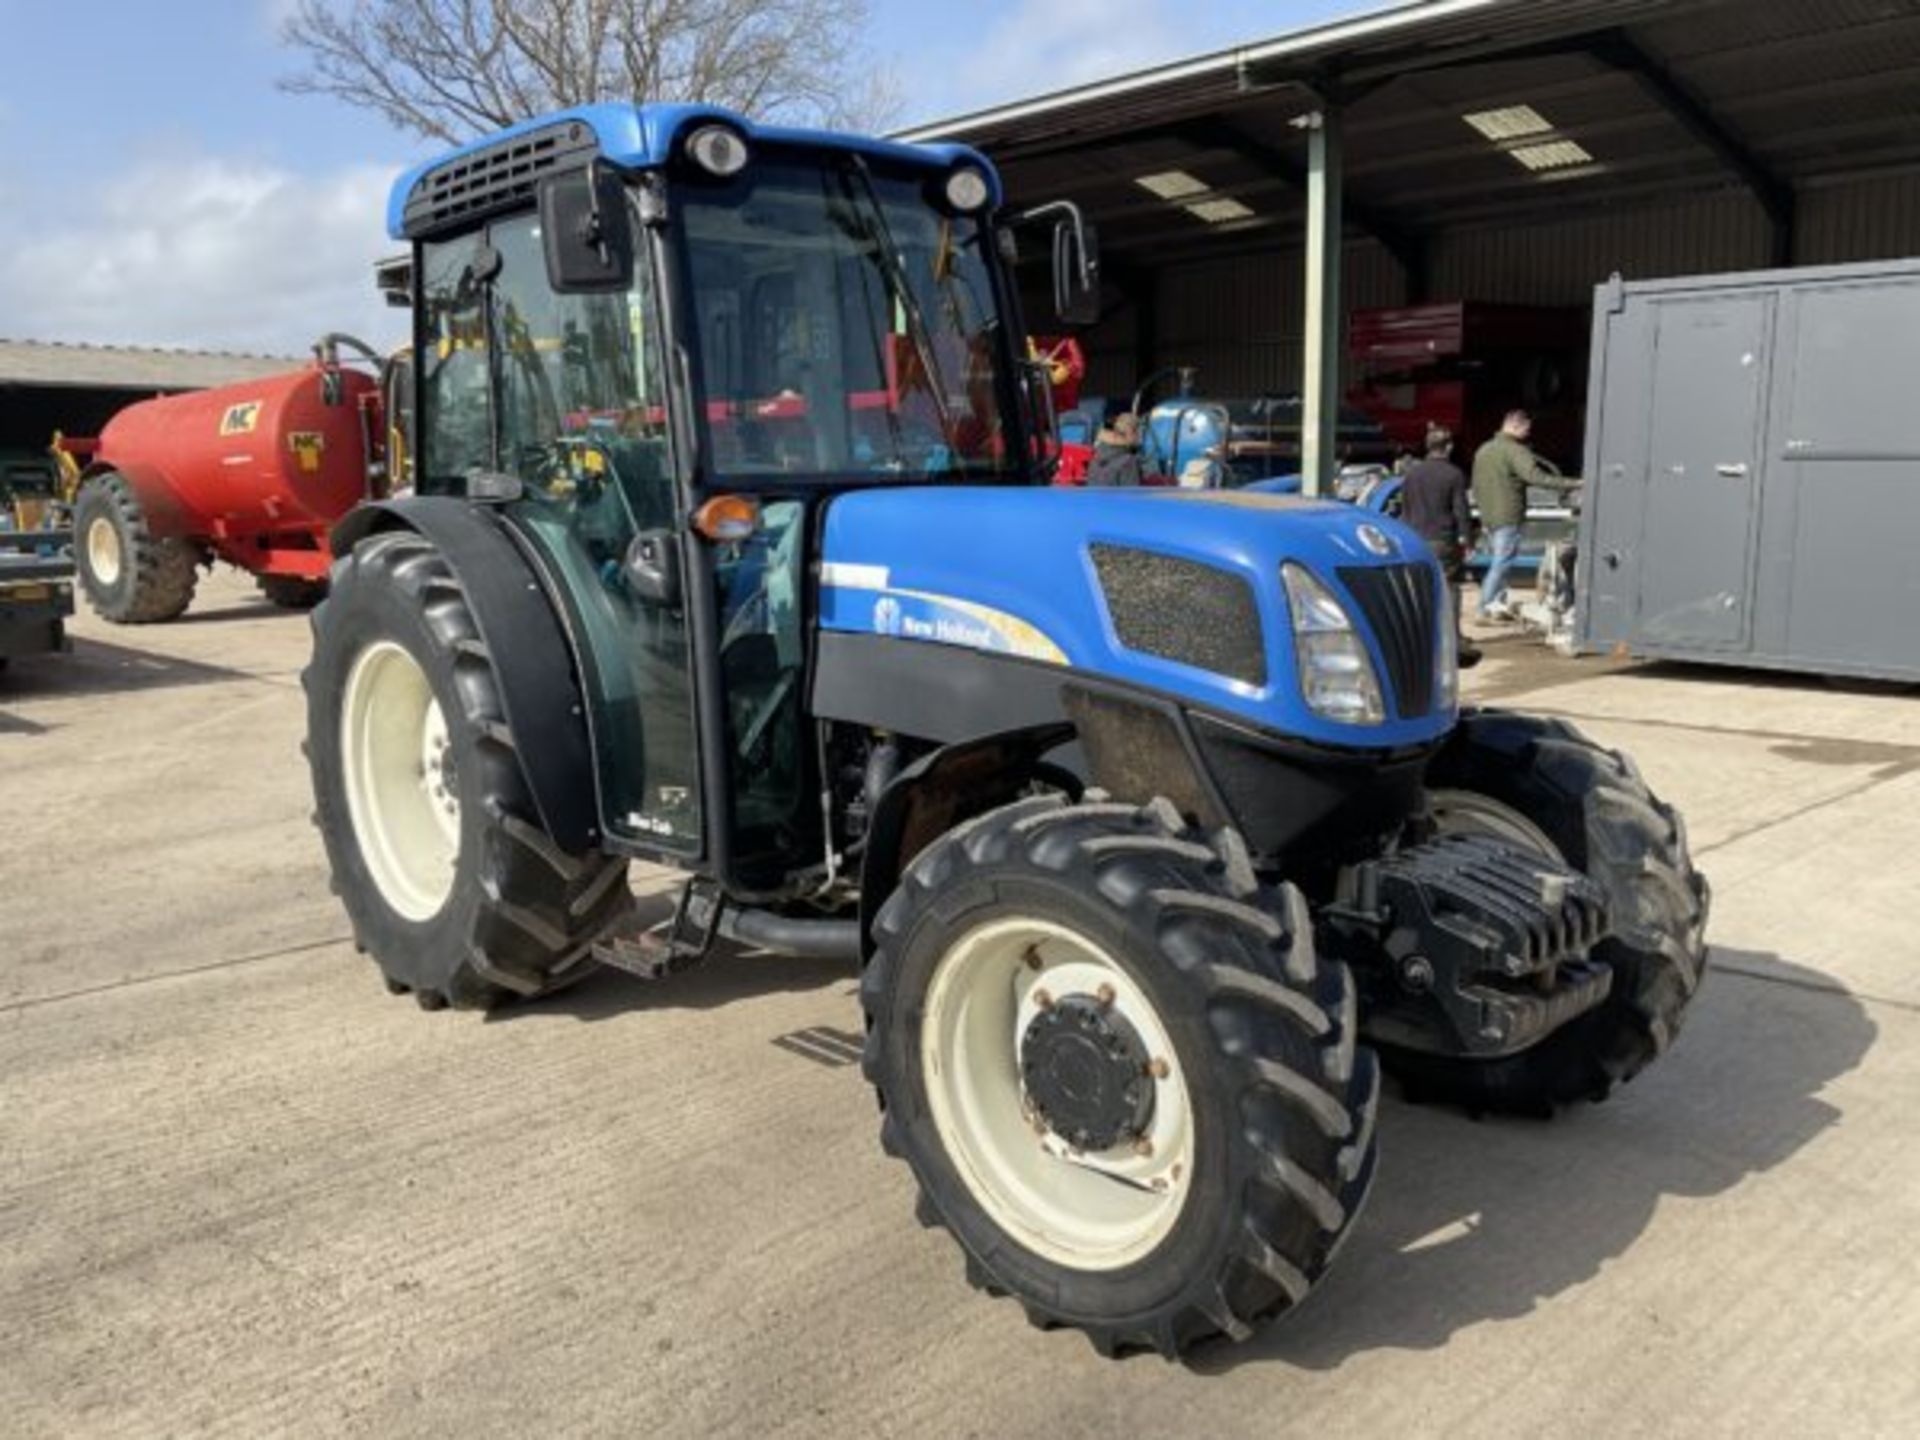 NEW HOLLAND T4050F 5114 HOURS.